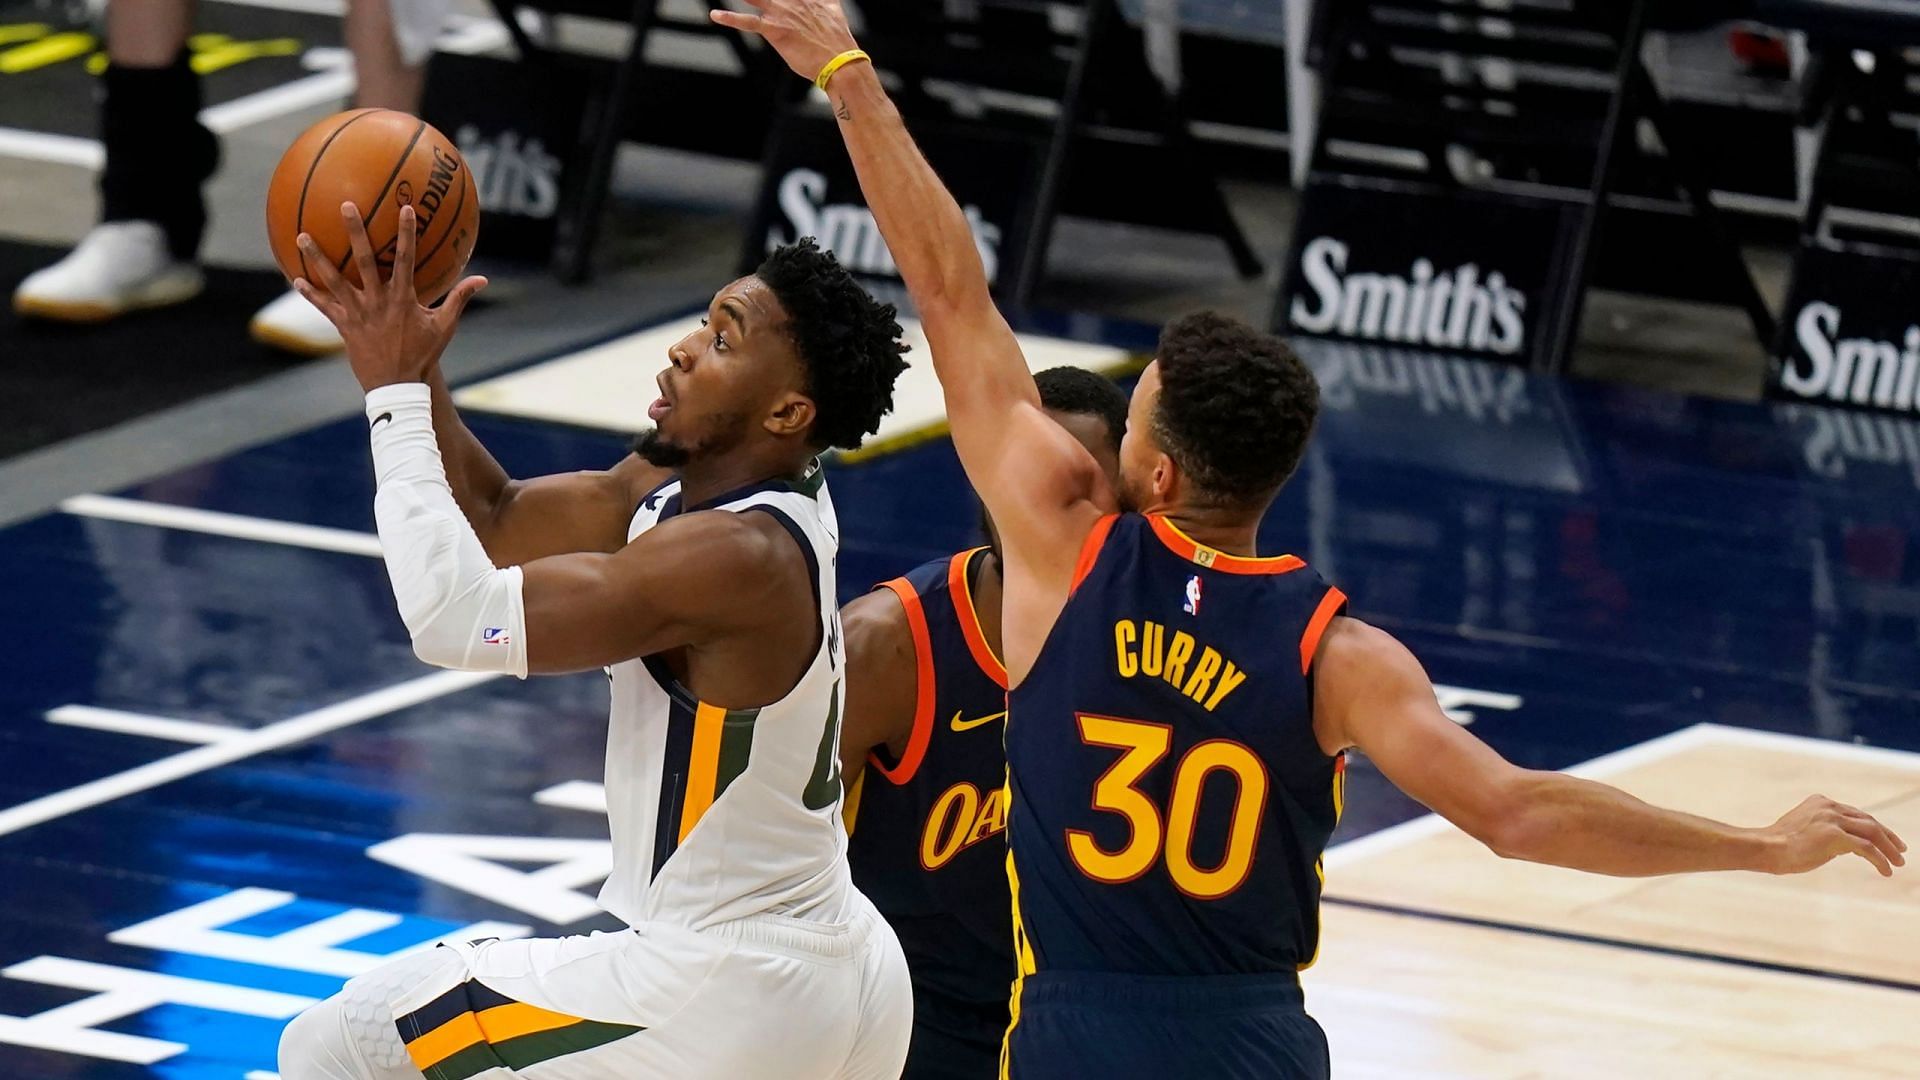 The Utah Jazz are hoping to tie their season series versus the Golden State Warriors in their next game.